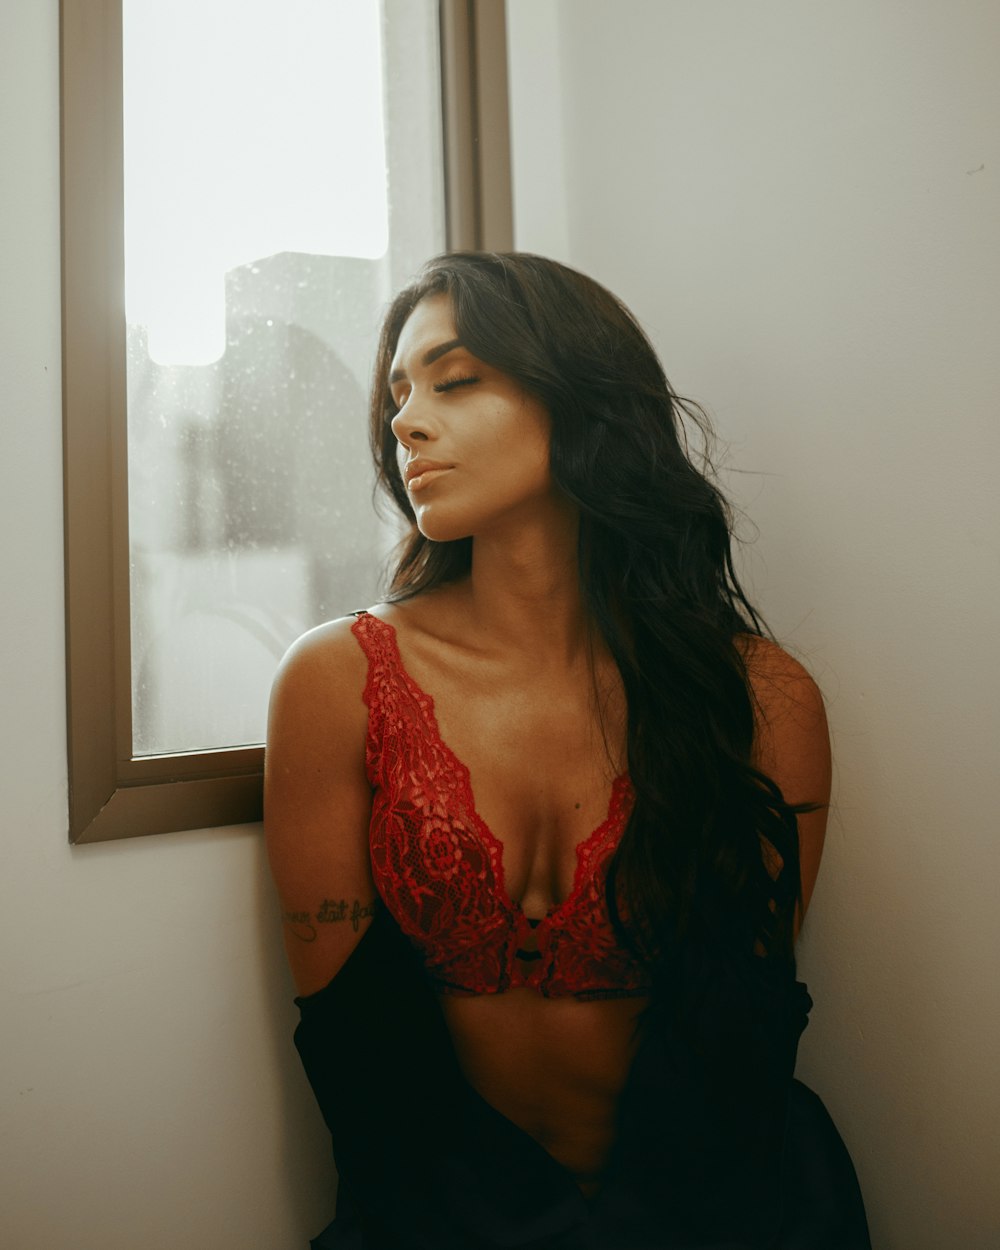 woman in red and black bra standing near window